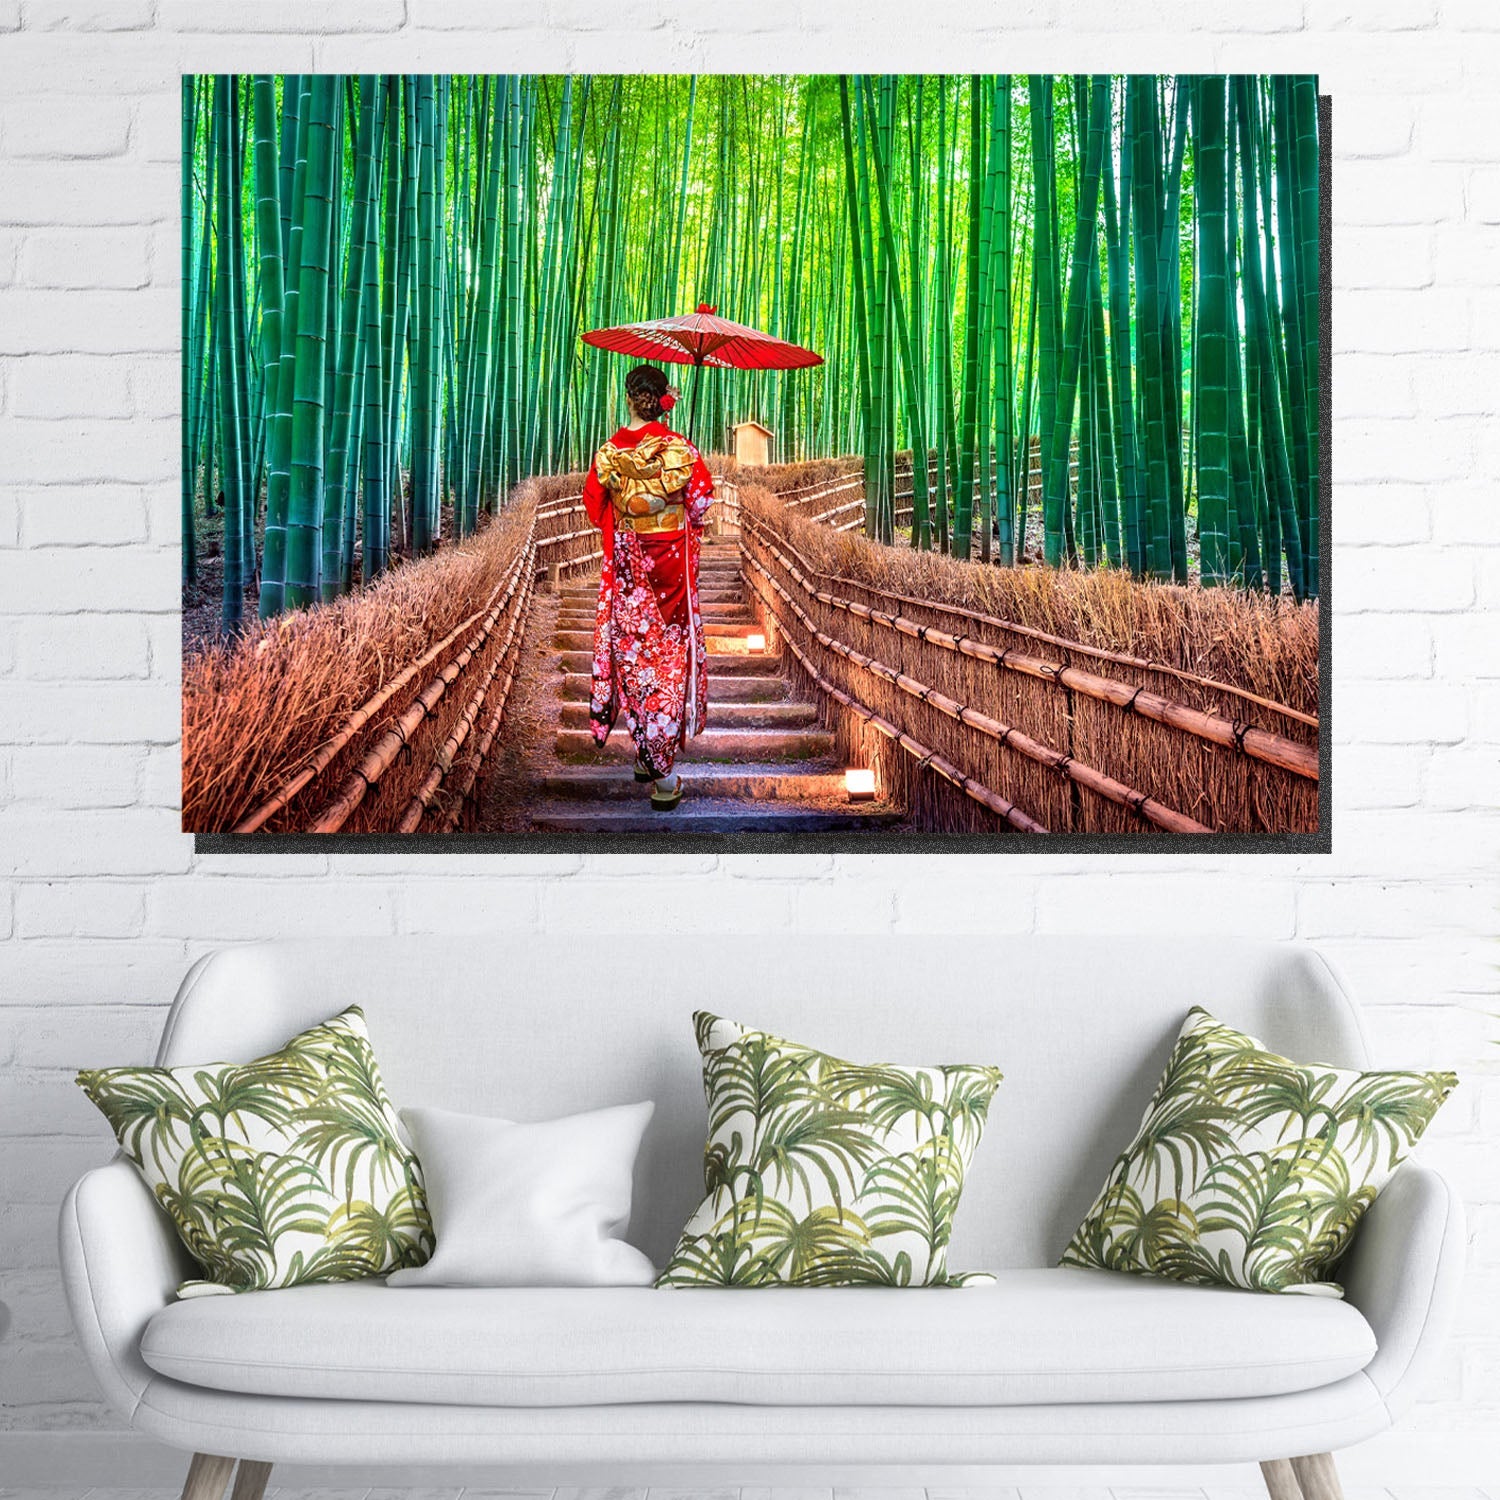 https://cdn.shopify.com/s/files/1/0387/9986/8044/products/KyotoBambooForestCanvasArtprintStretched-4.jpg